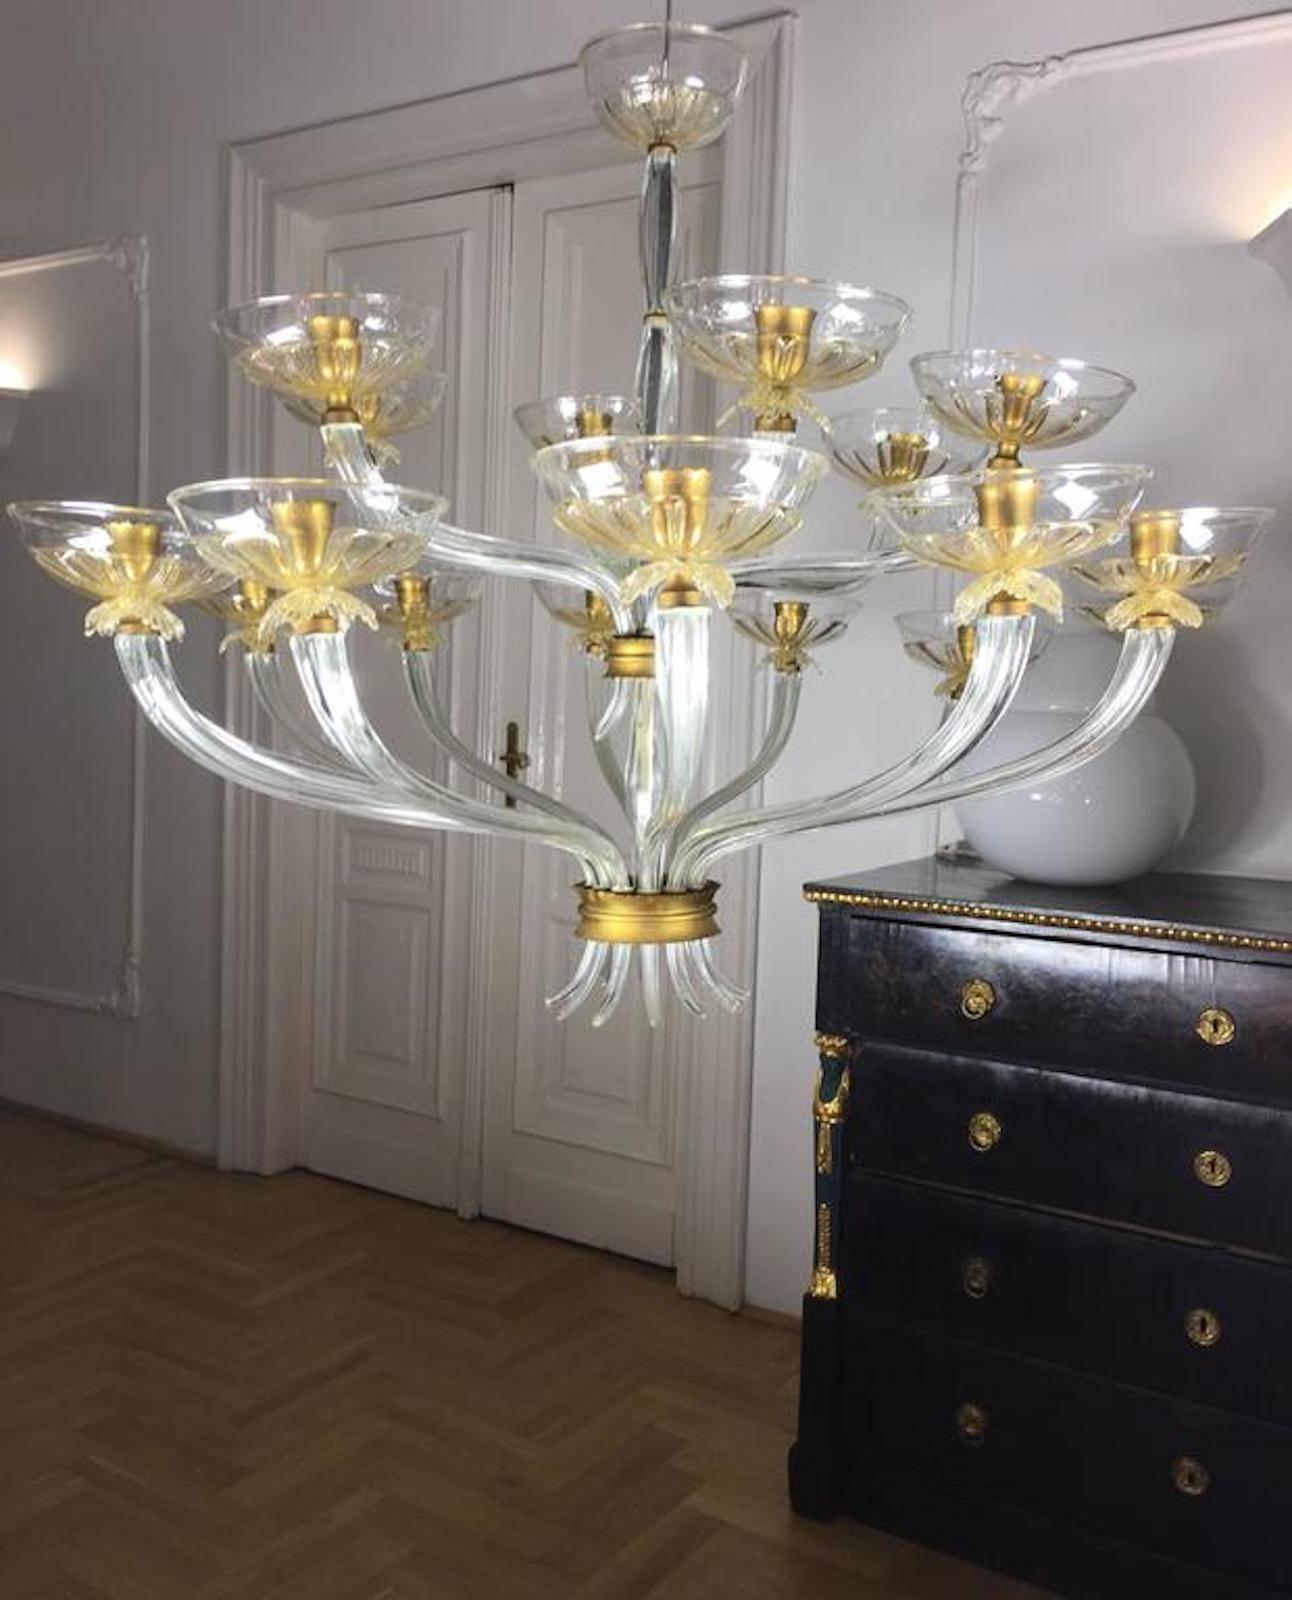 Extraordinary Art Deco chandelier of the renowned Barovier & Toso glassware. It was made with 18 arms, and was refined with elegant gold-plated cups. From the private collection of Baron Von Plant.